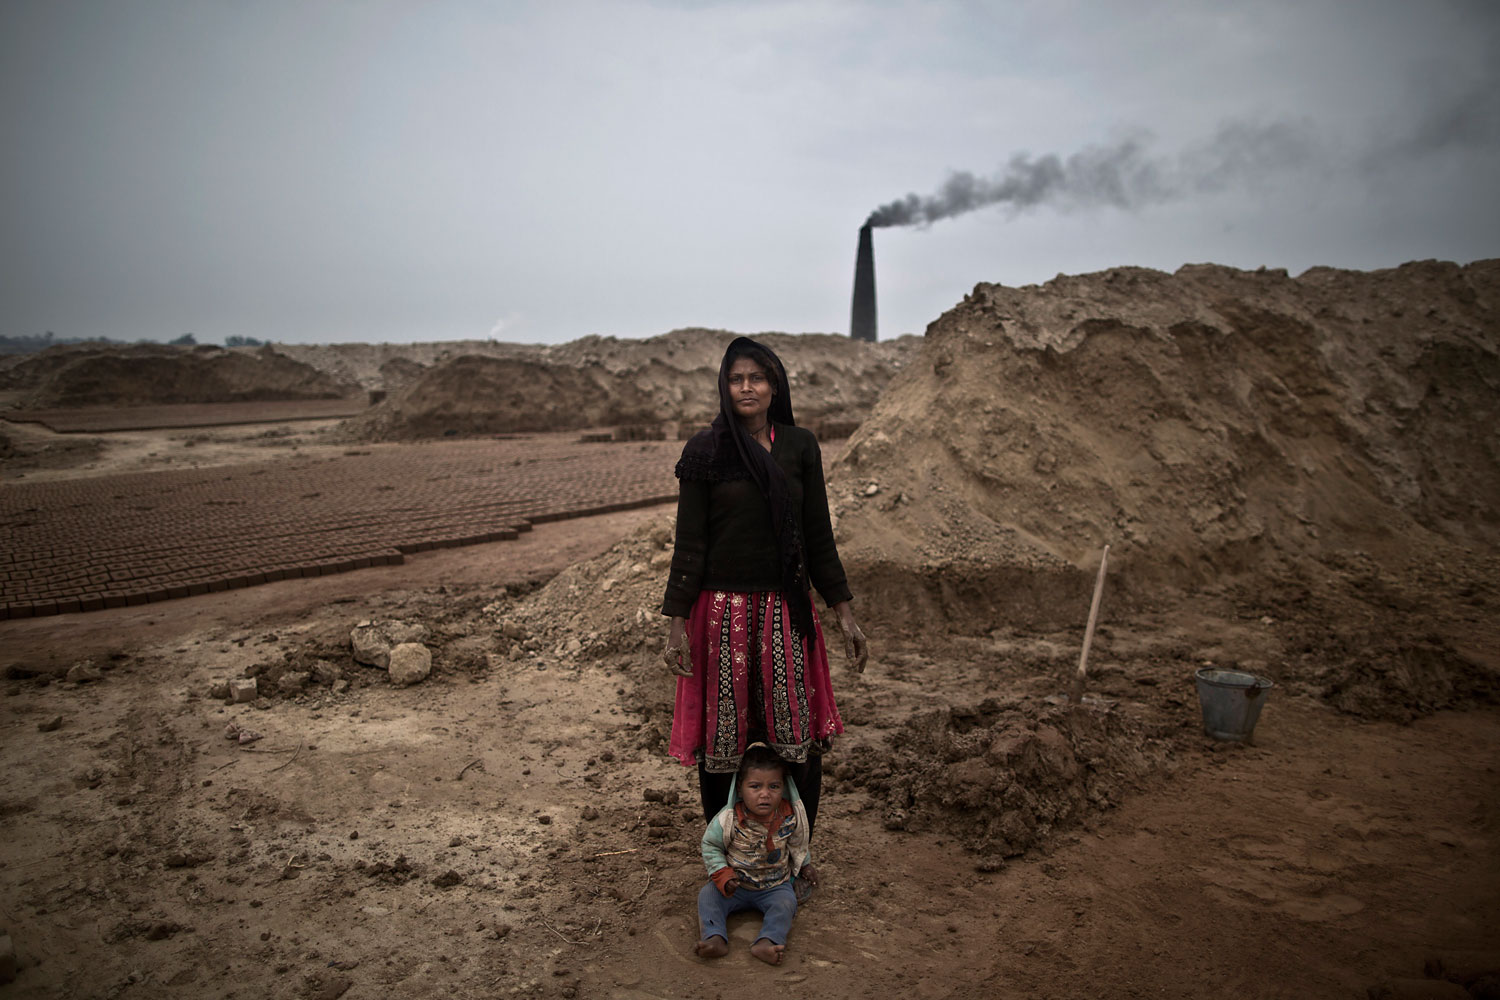 Rubina Rafaqat, 22, a Pakistani brick factory worker, poses for a picture with her child at the site of her work in Mandra, near Rawalpindi, Pakistan, March 3, 2014. Rubina and her husband are in debt to their employer the amount of 200,000 rupees (approximately $2000).